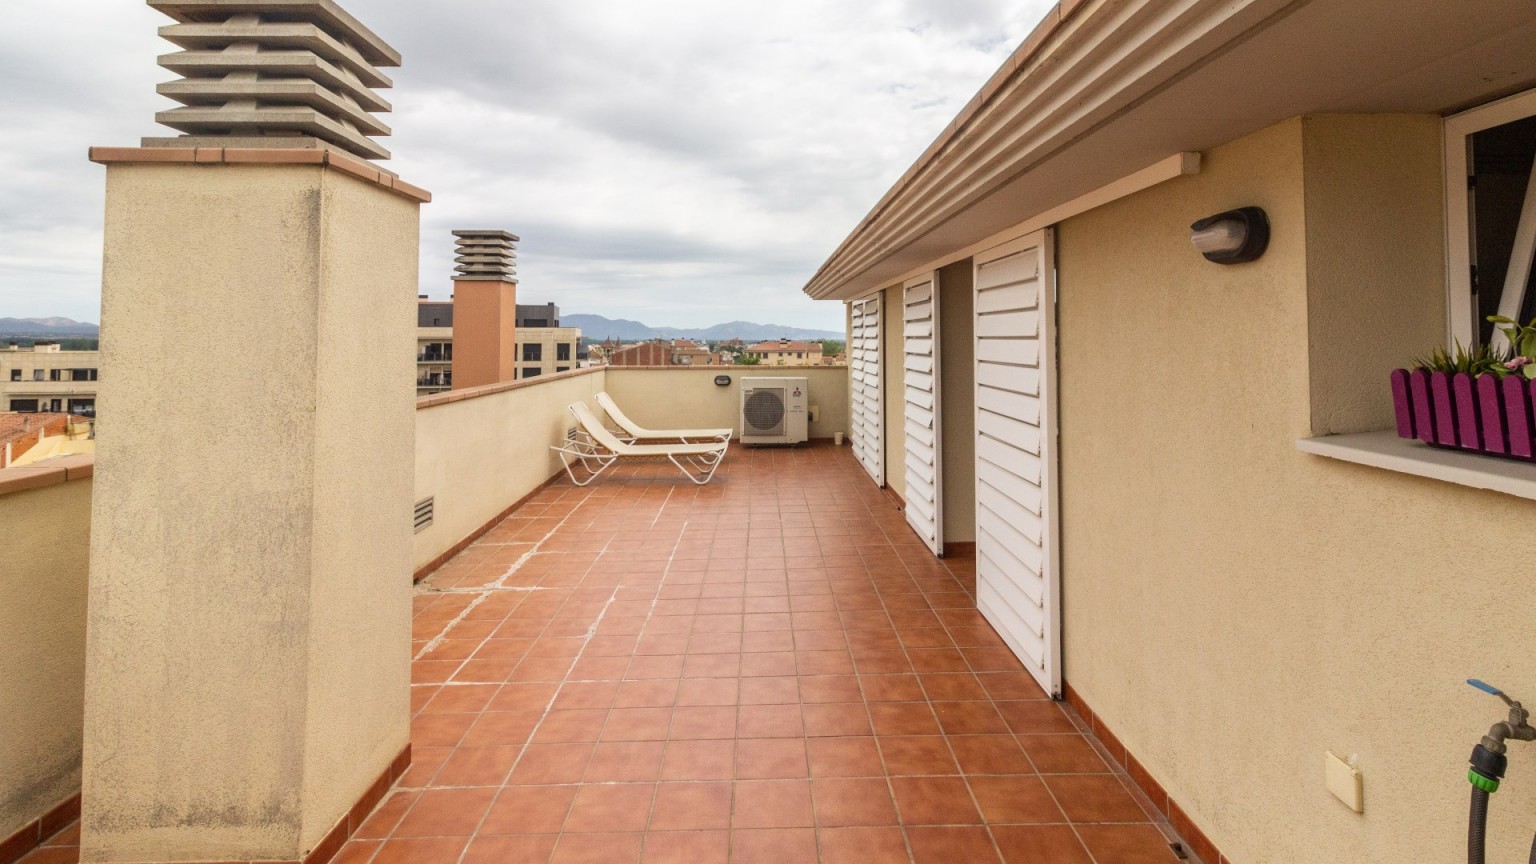 Centrally located duplex for sale, 4 bedrooms, with excellent finishes and parking included.